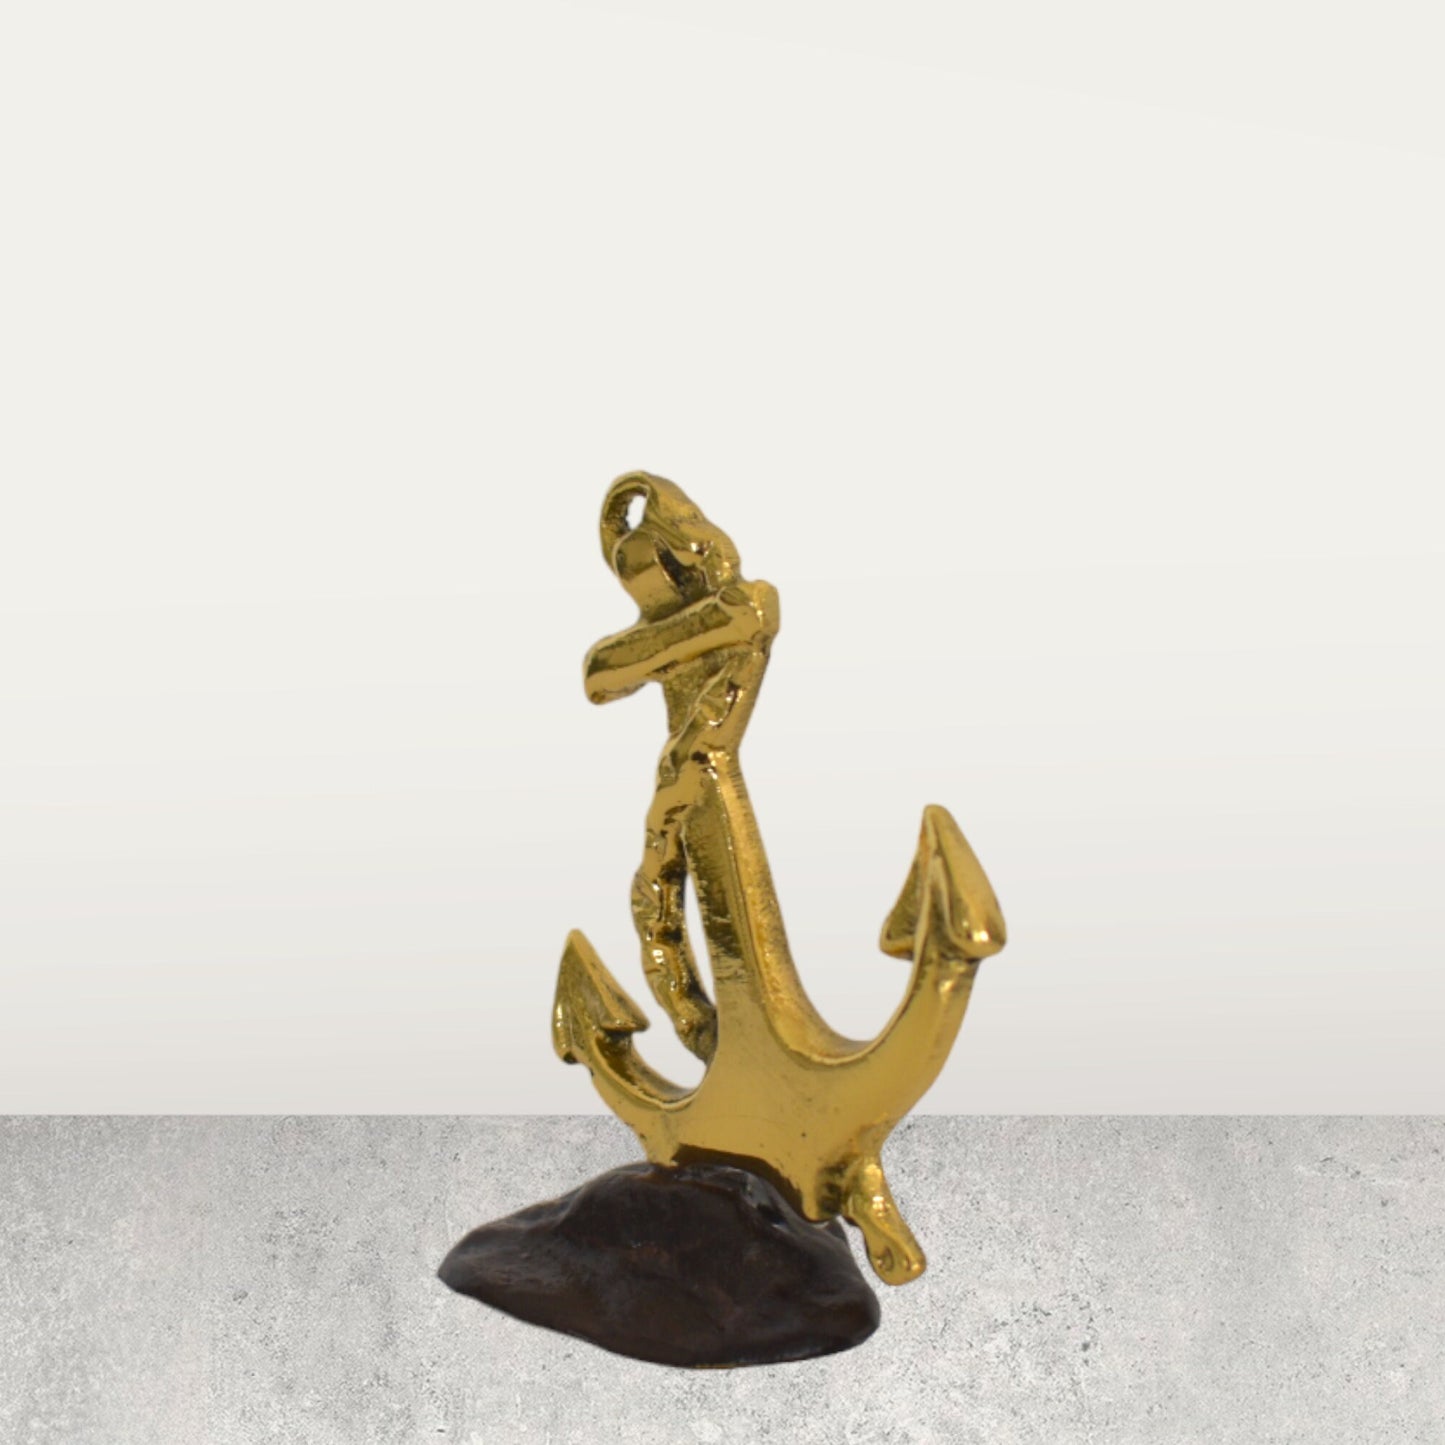 Anchor - Tool used to moor a vessel to the bottom of a sea to resist movement - Symbol of Hope, Steadfastness, Calm - pure bronze  statue